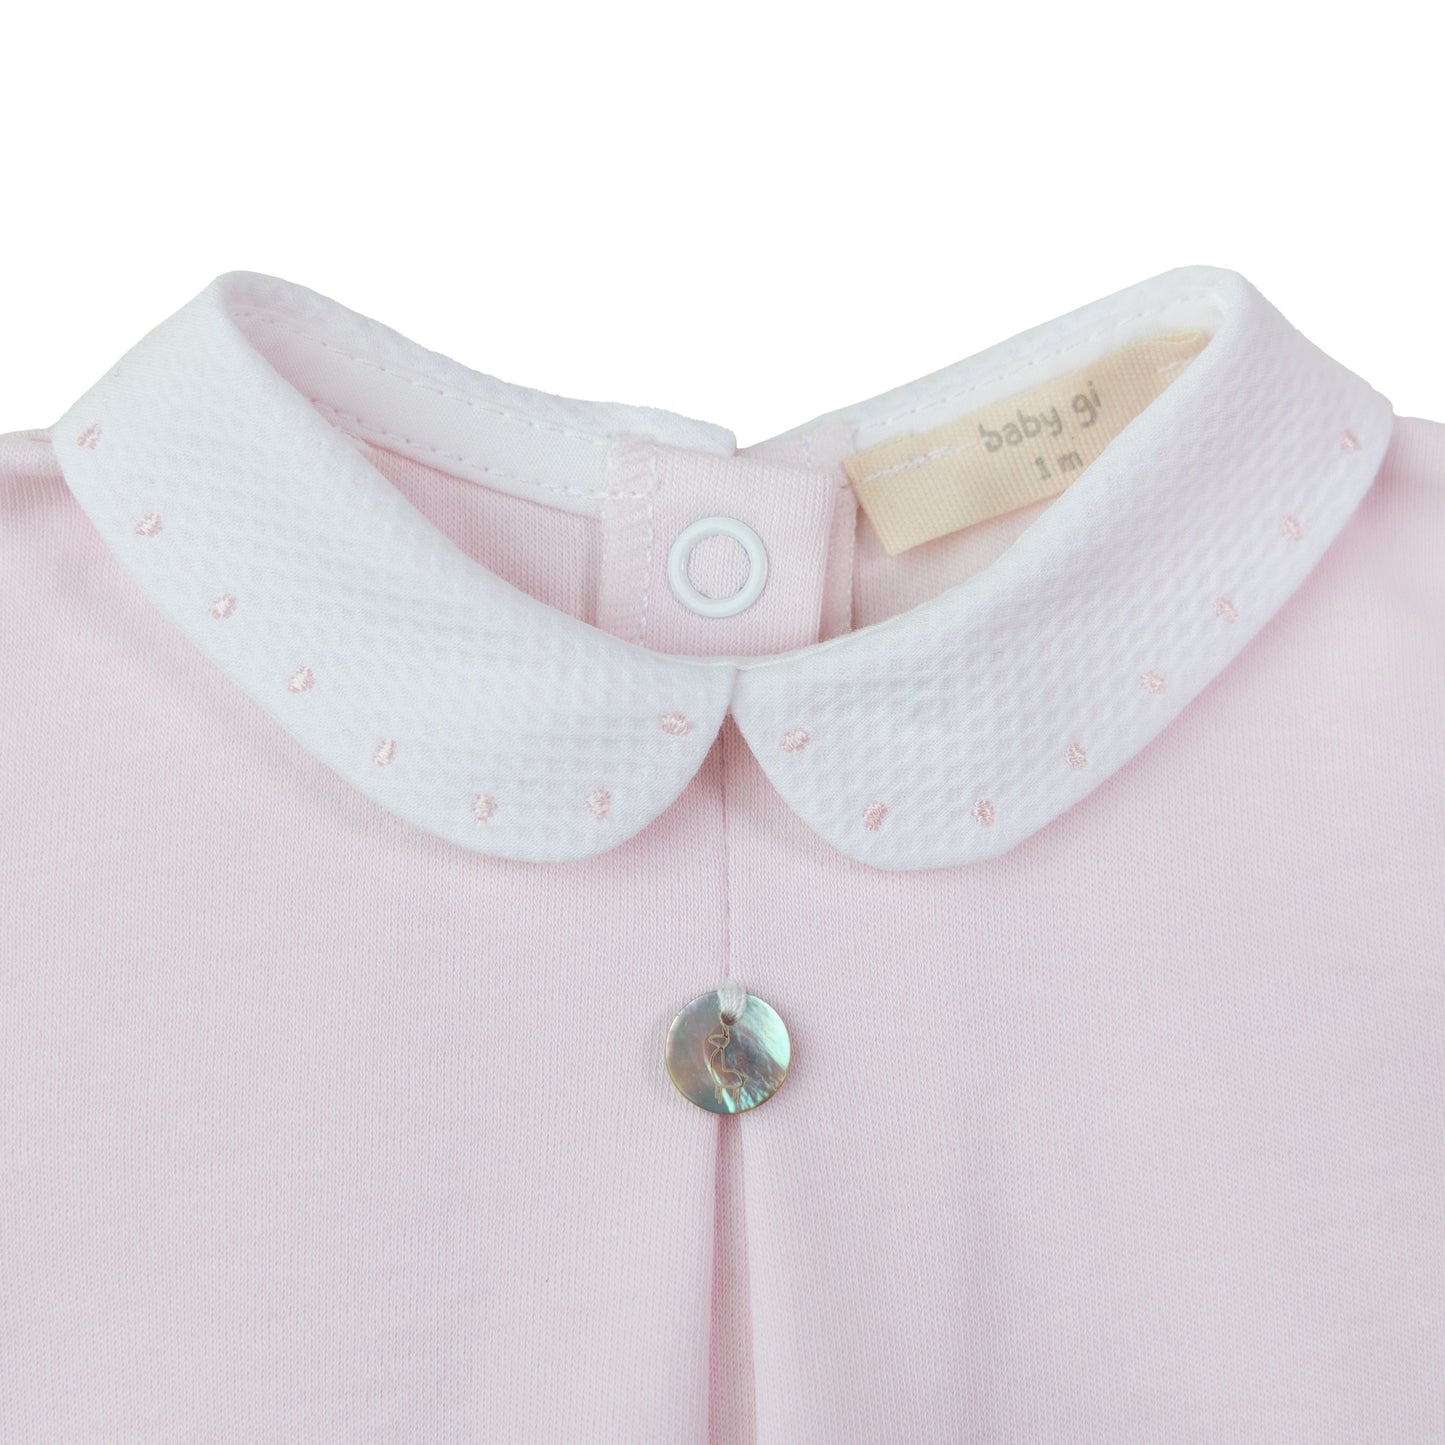 Baby Gi Pink Cotton Two Piece Outfit & Bib